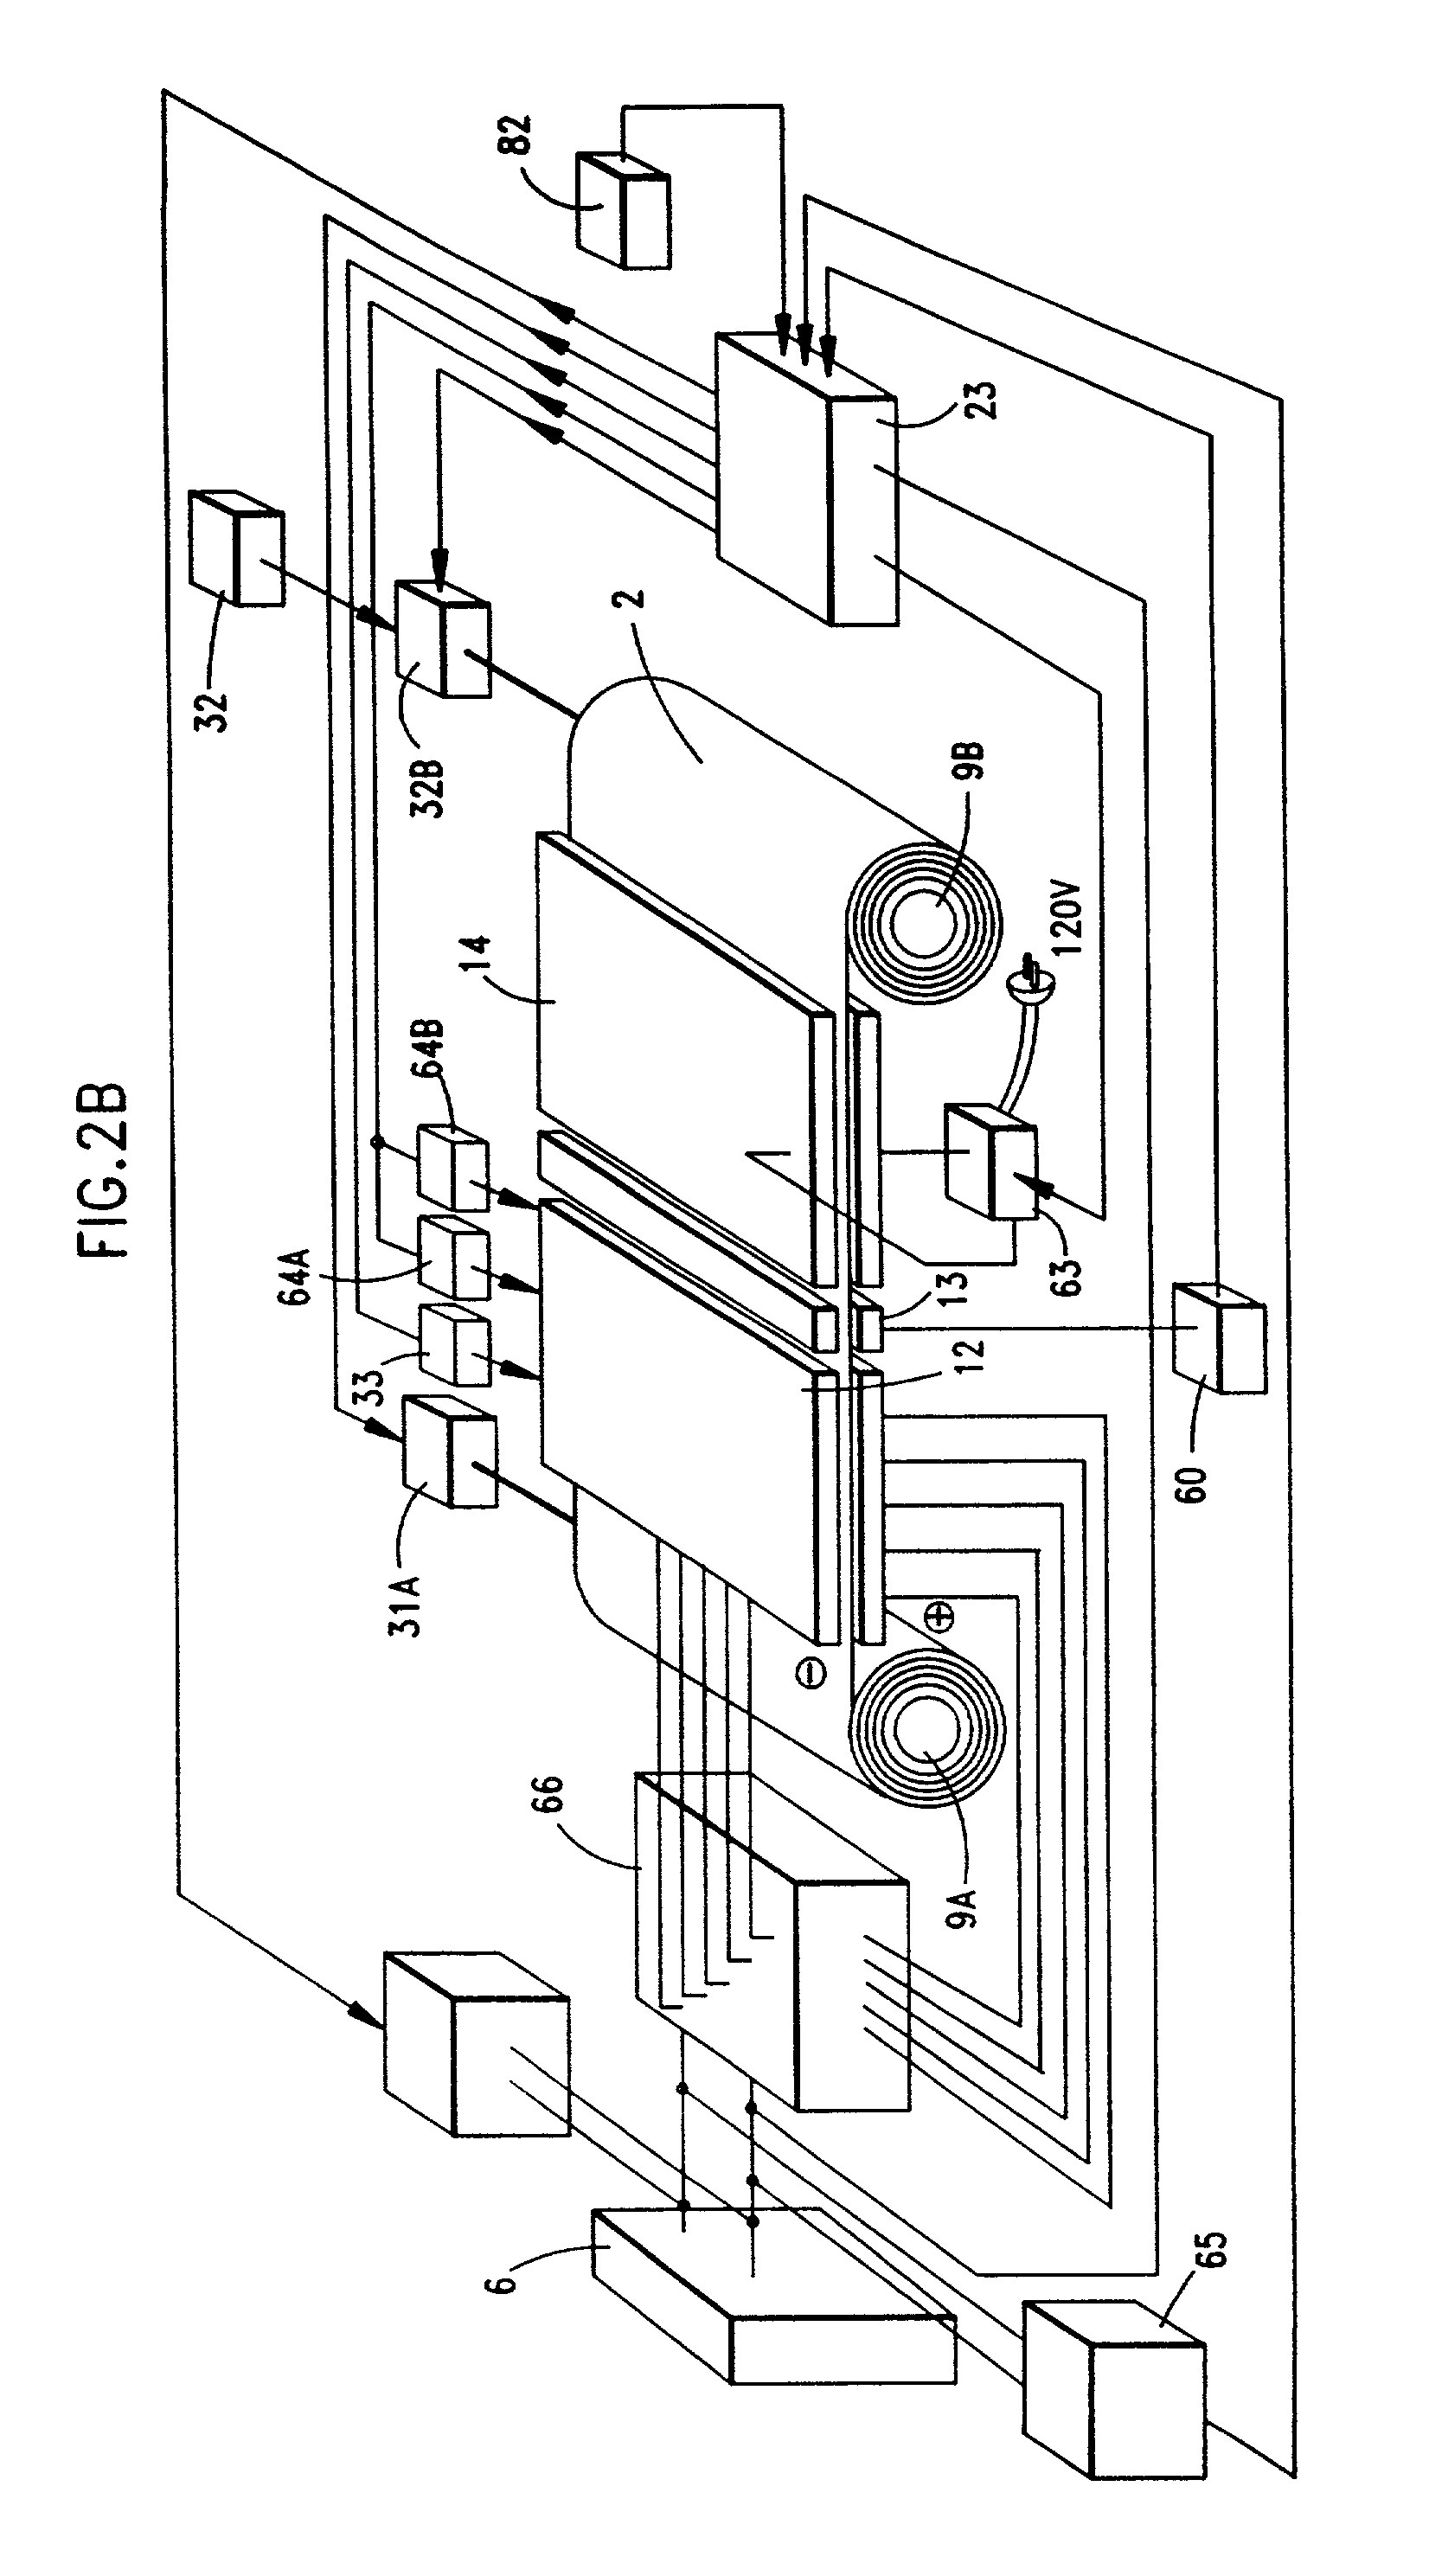 Metal-air fuel cell battery system employing metal-fuel cards